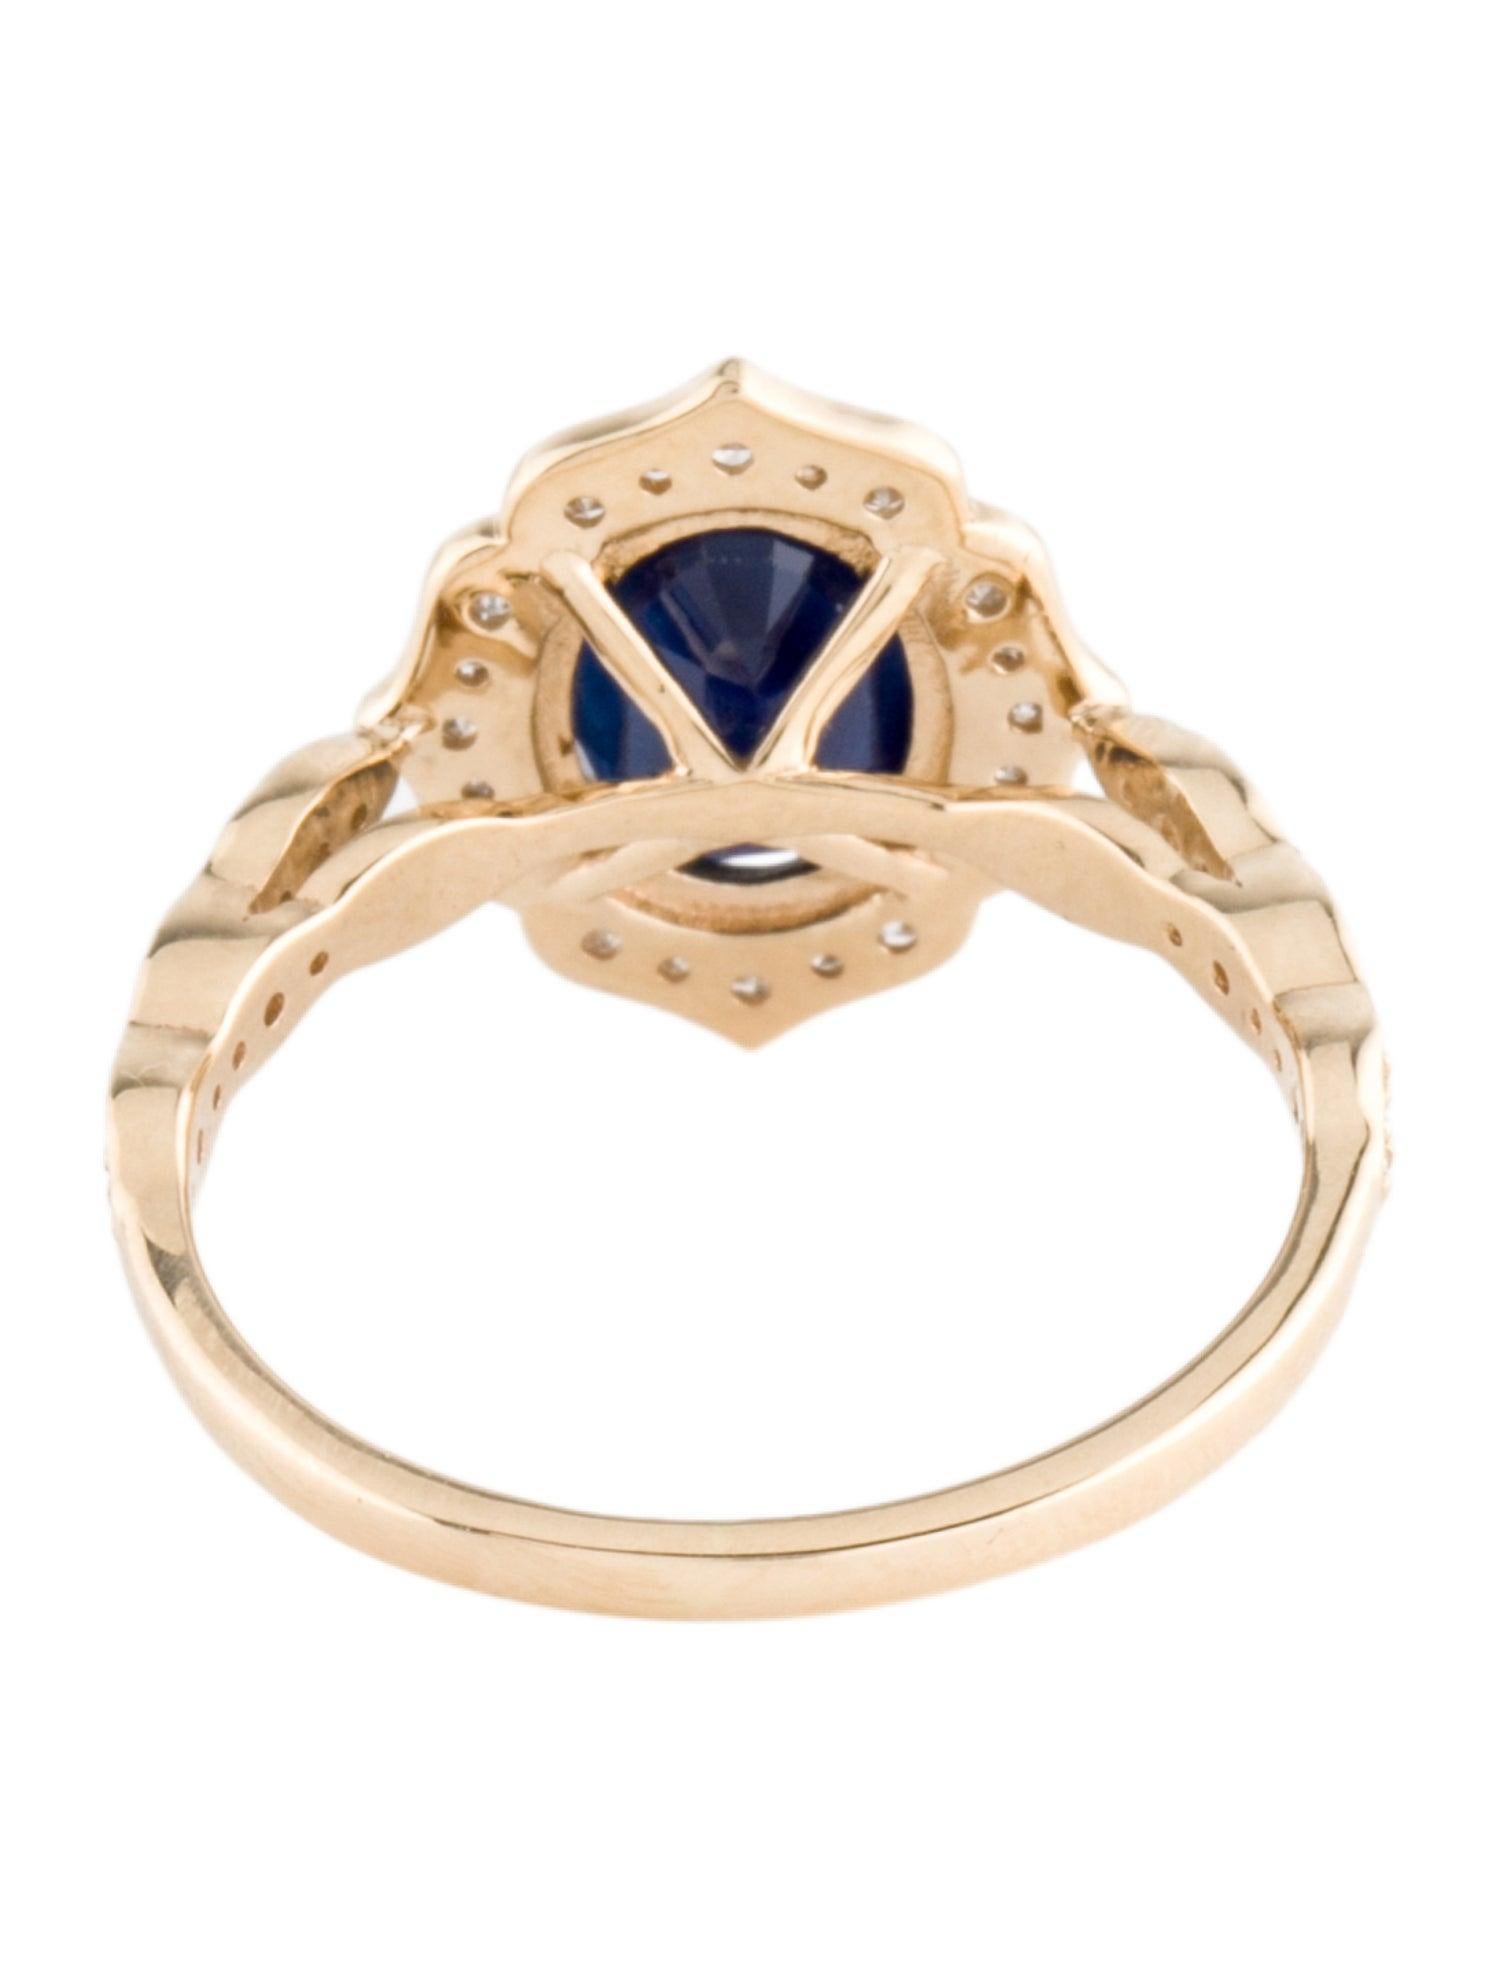 Brilliant Cut Luxurious 14K Gold Sapphire & Diamond Cocktail Ring Size 6.75 Statement Jewelry For Sale